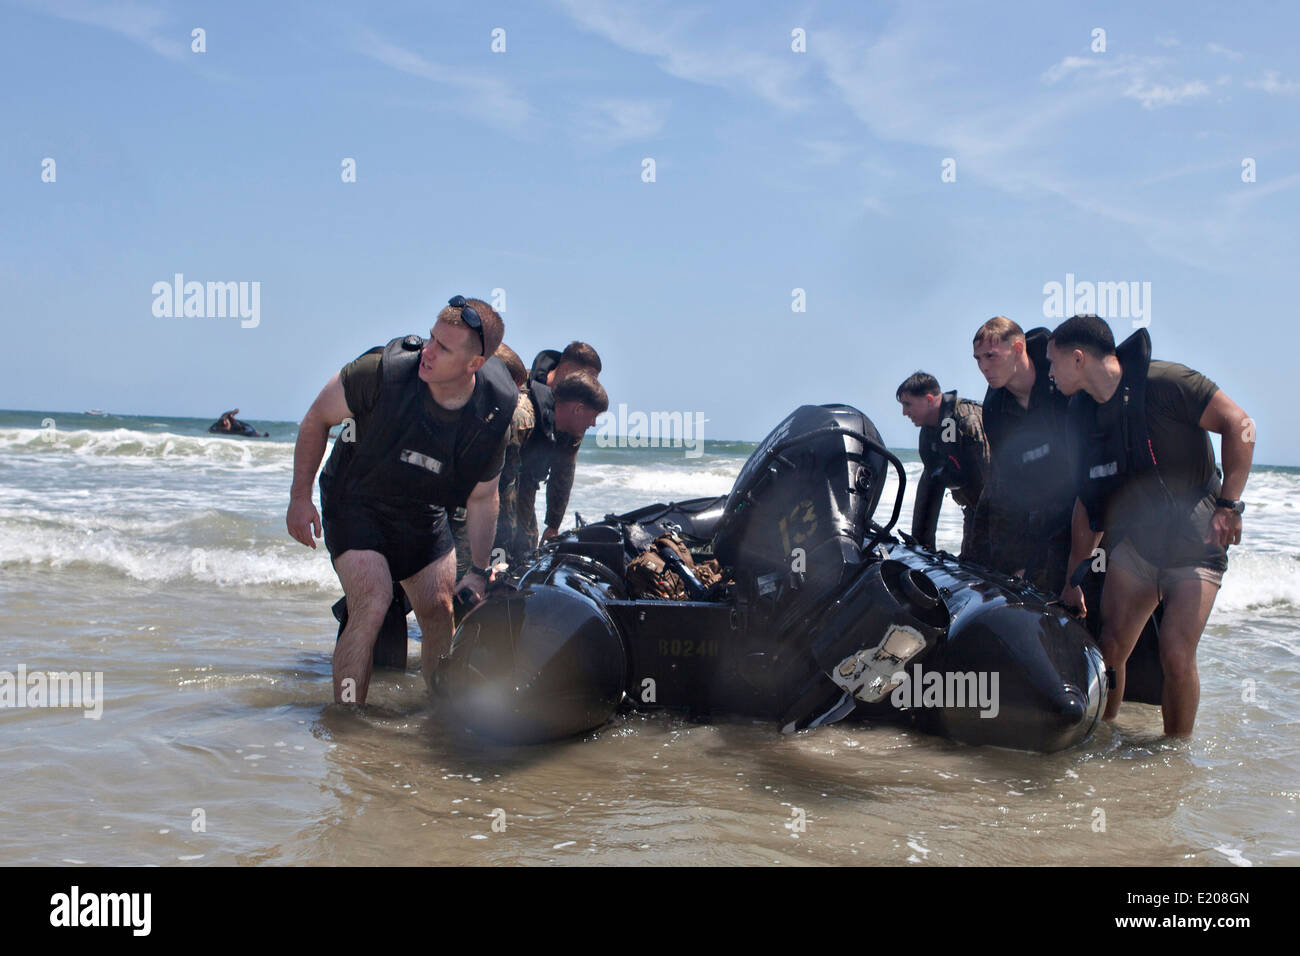 US Marines reconnaissance commandos maneuver an F470 combat rubber raiding craft onto the beach after conducting a hard duck insertion at Onslow Beach June 4, 2014 in Camp Lejeune, N.C. A hard duck insertion involves dropping a fully inflated rubber boat with Marines into the water from a helicopter. Stock Photo